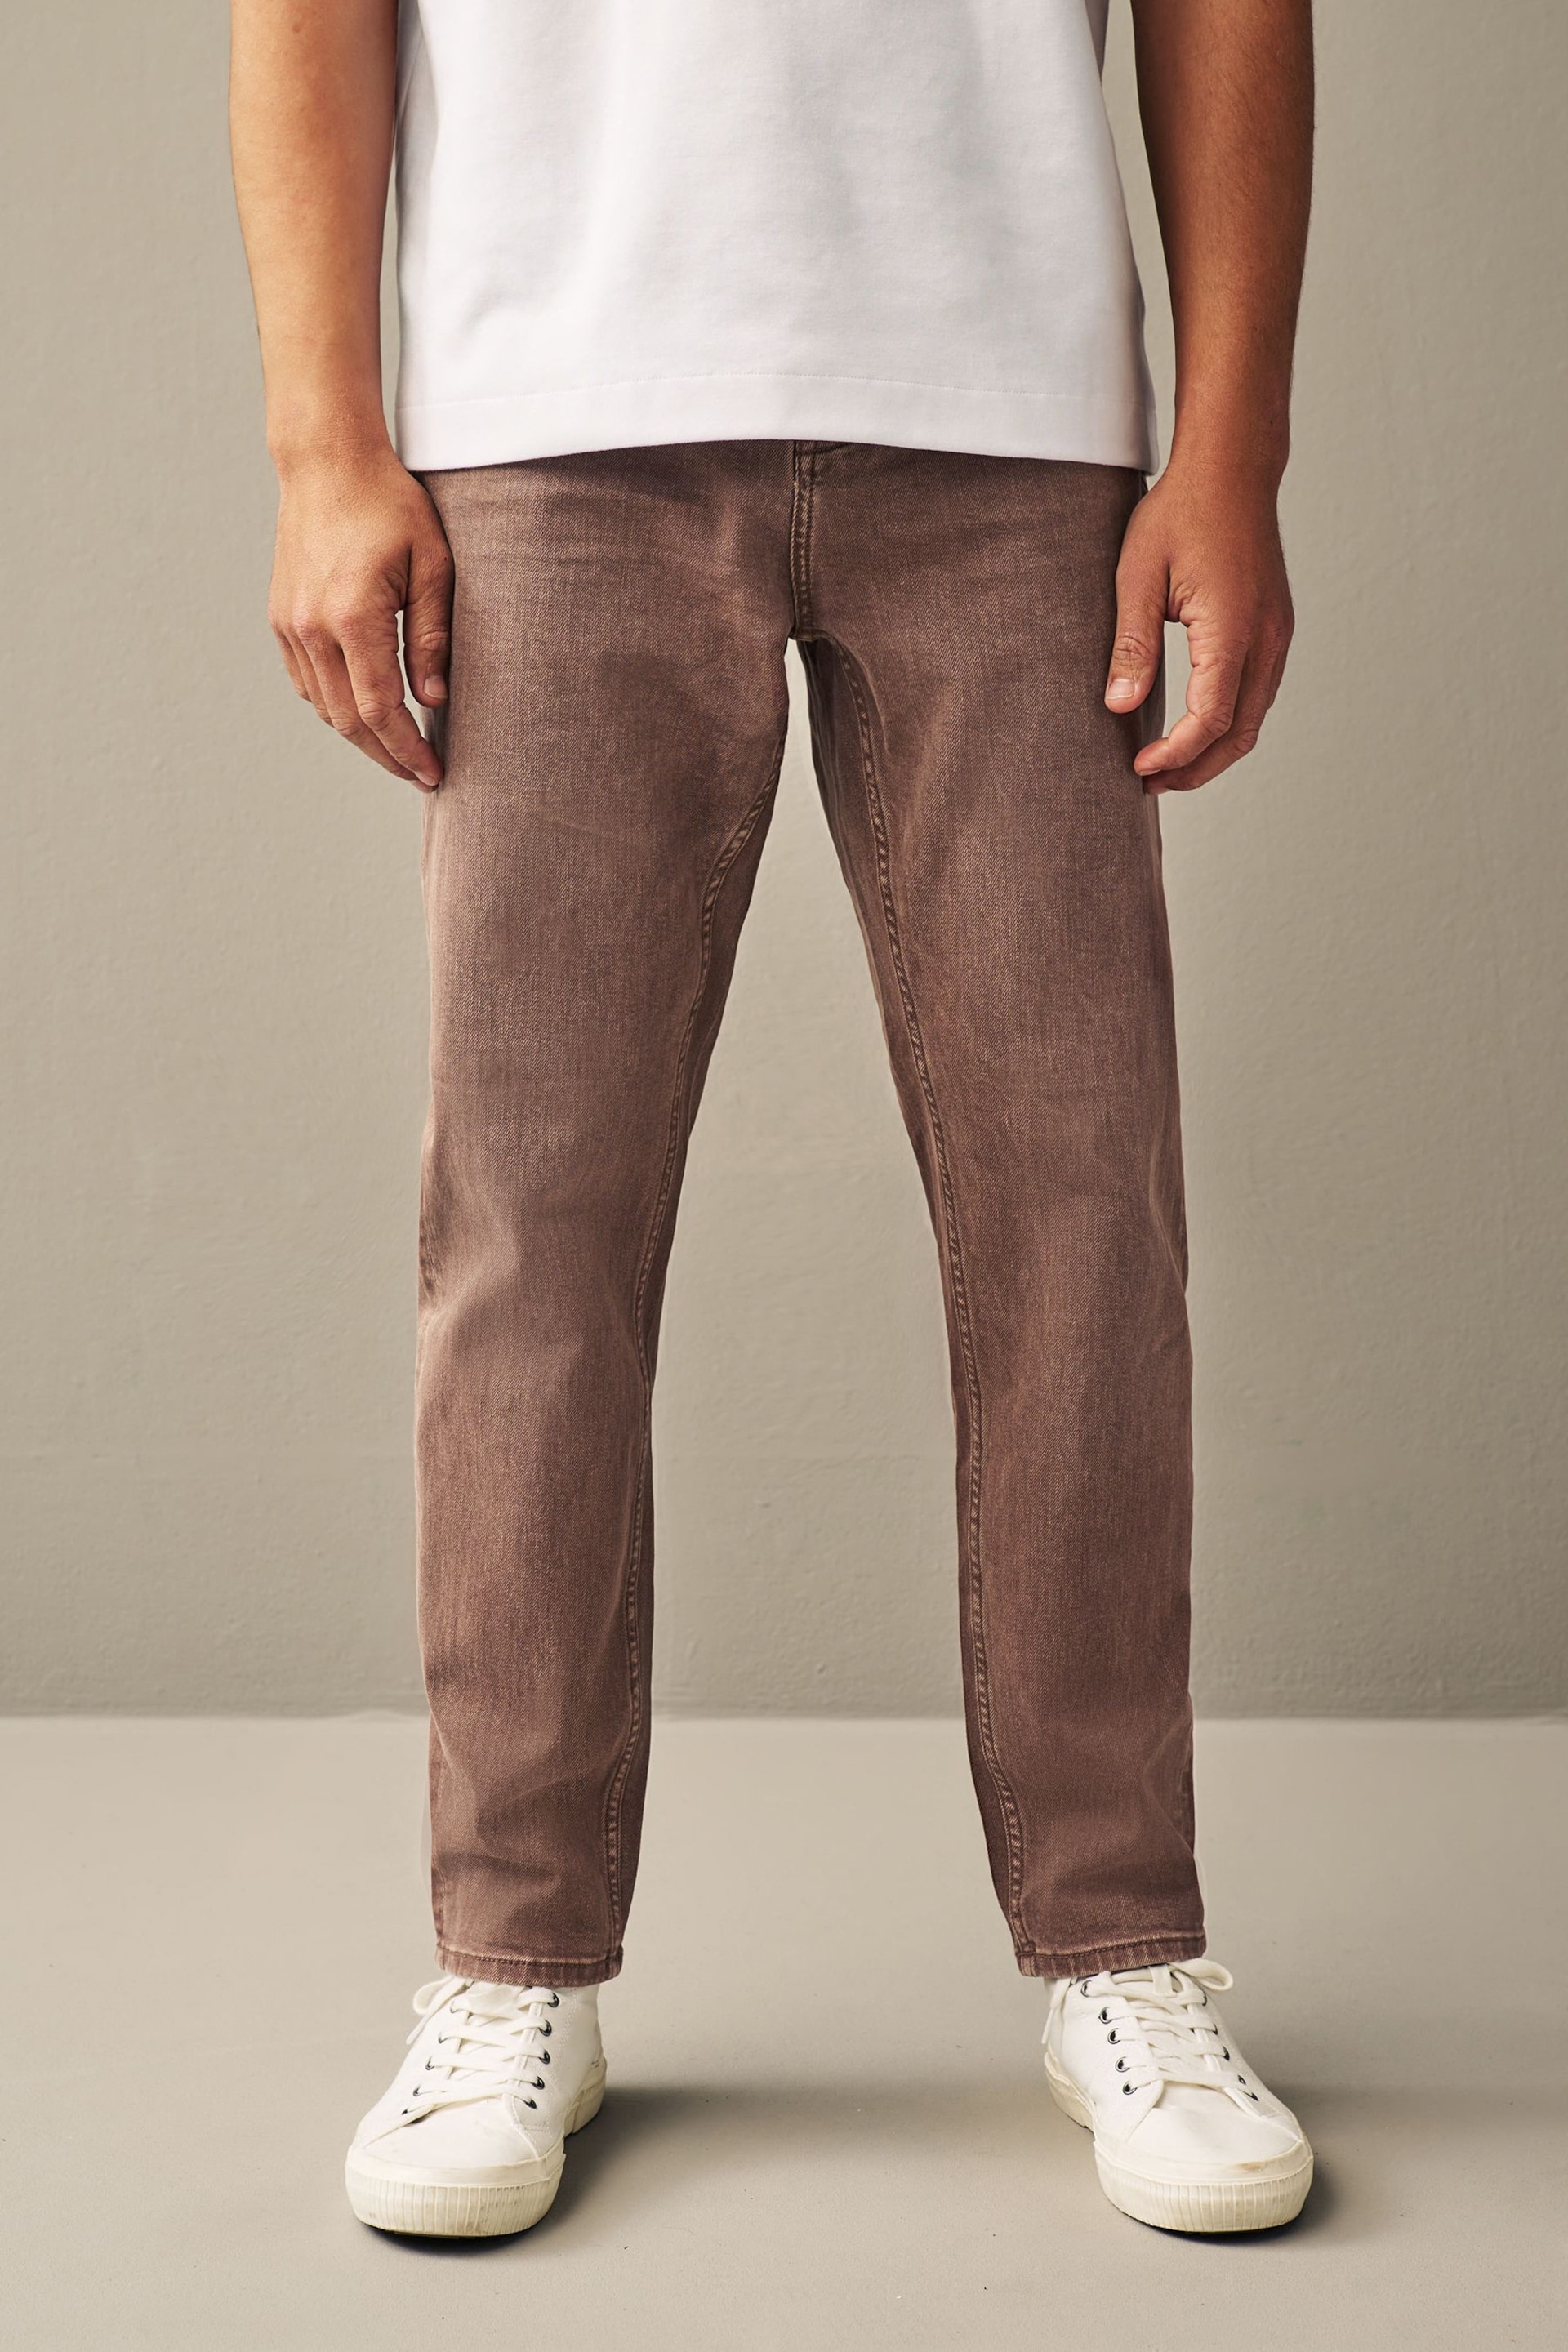 Brown Rust Regular Fit Overdyed Denim Jeans - Image 1 of 8